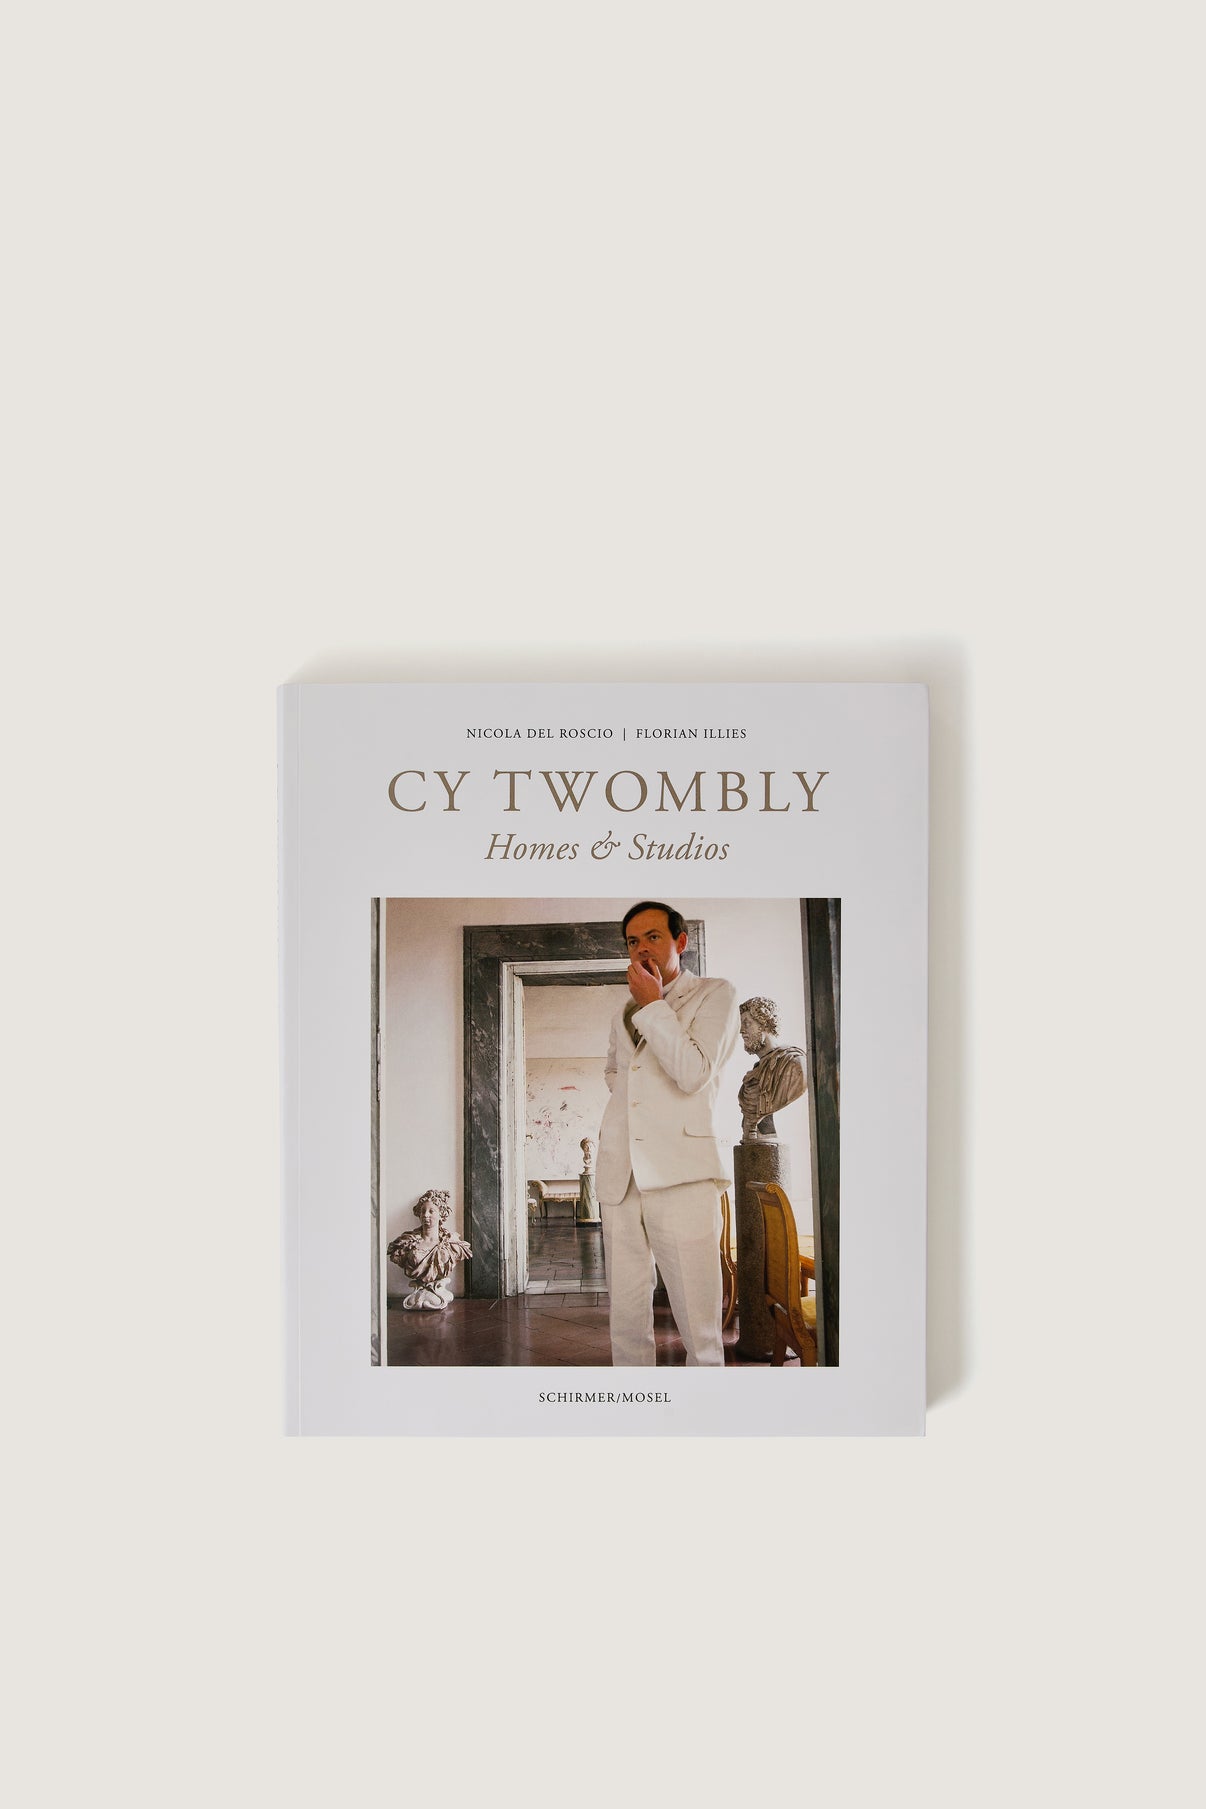 BOOK "CY TWOMBLY, HOMES AND STUDIOS" vue 1